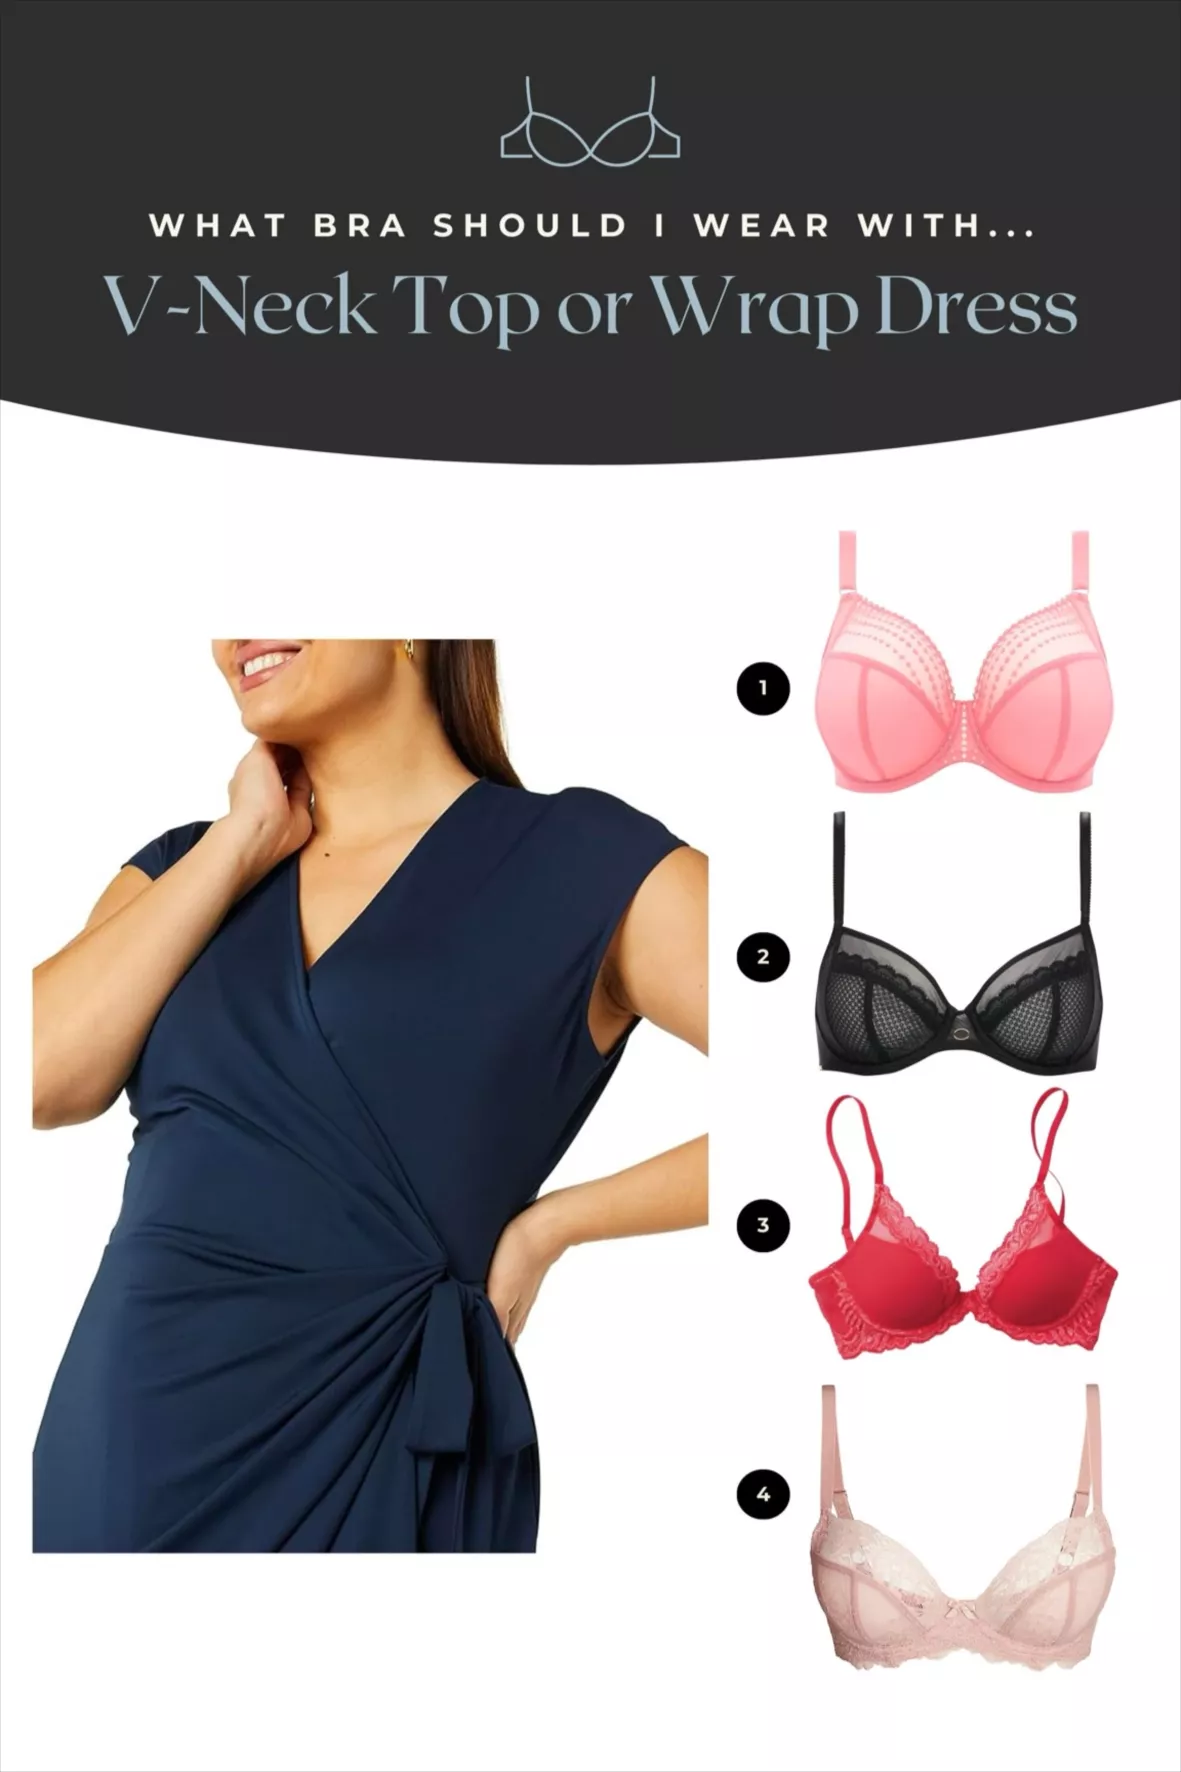 Caralyn Mirand - To wear or not to wear shapewear? Today